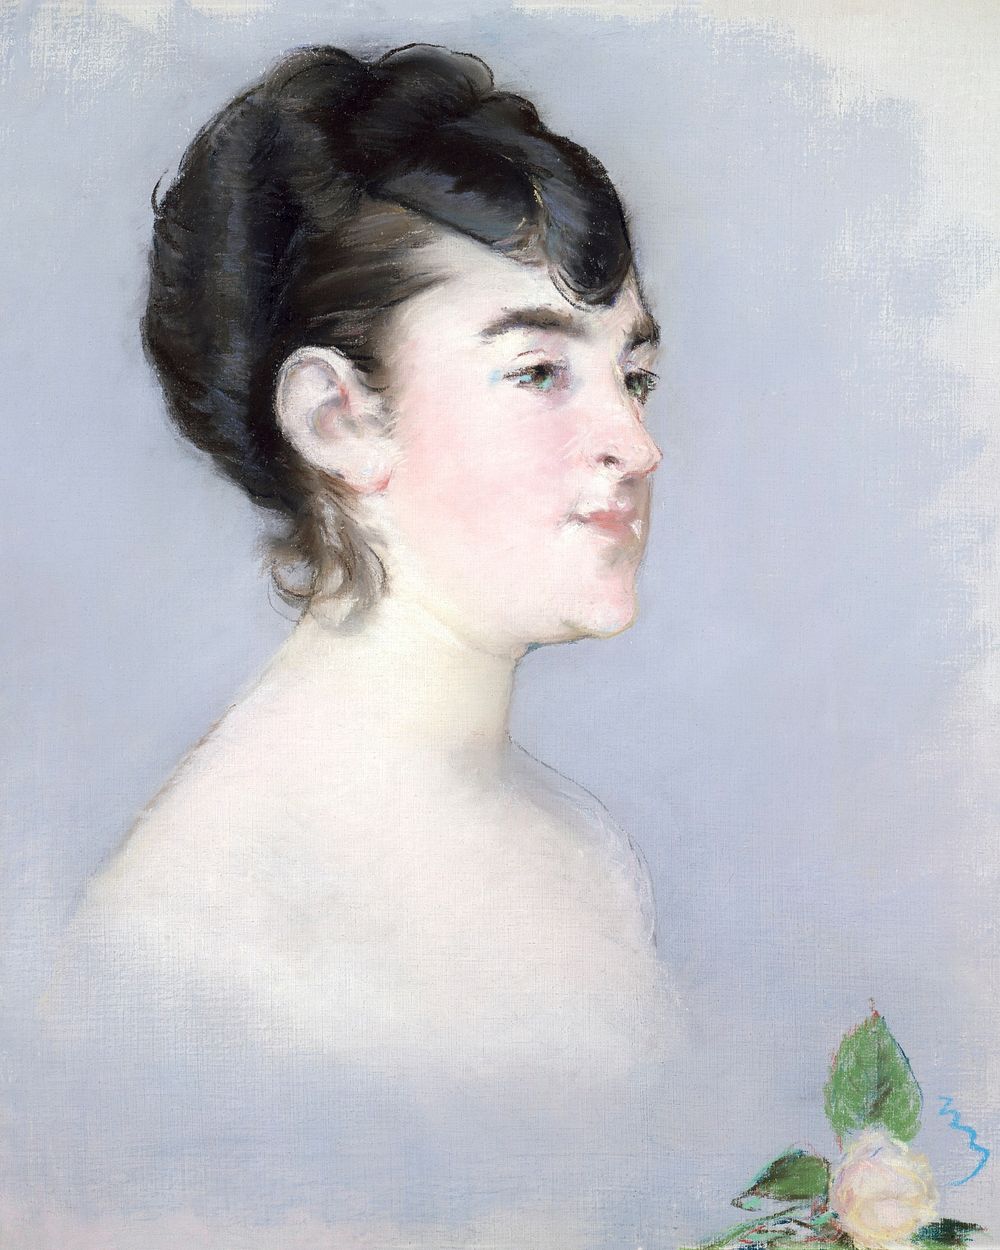 Mademoiselle Isabelle Lemonnier (1857&ndash;1926), (1879&ndash;82) painting in high resolution by &Eacute;douard Manet.…